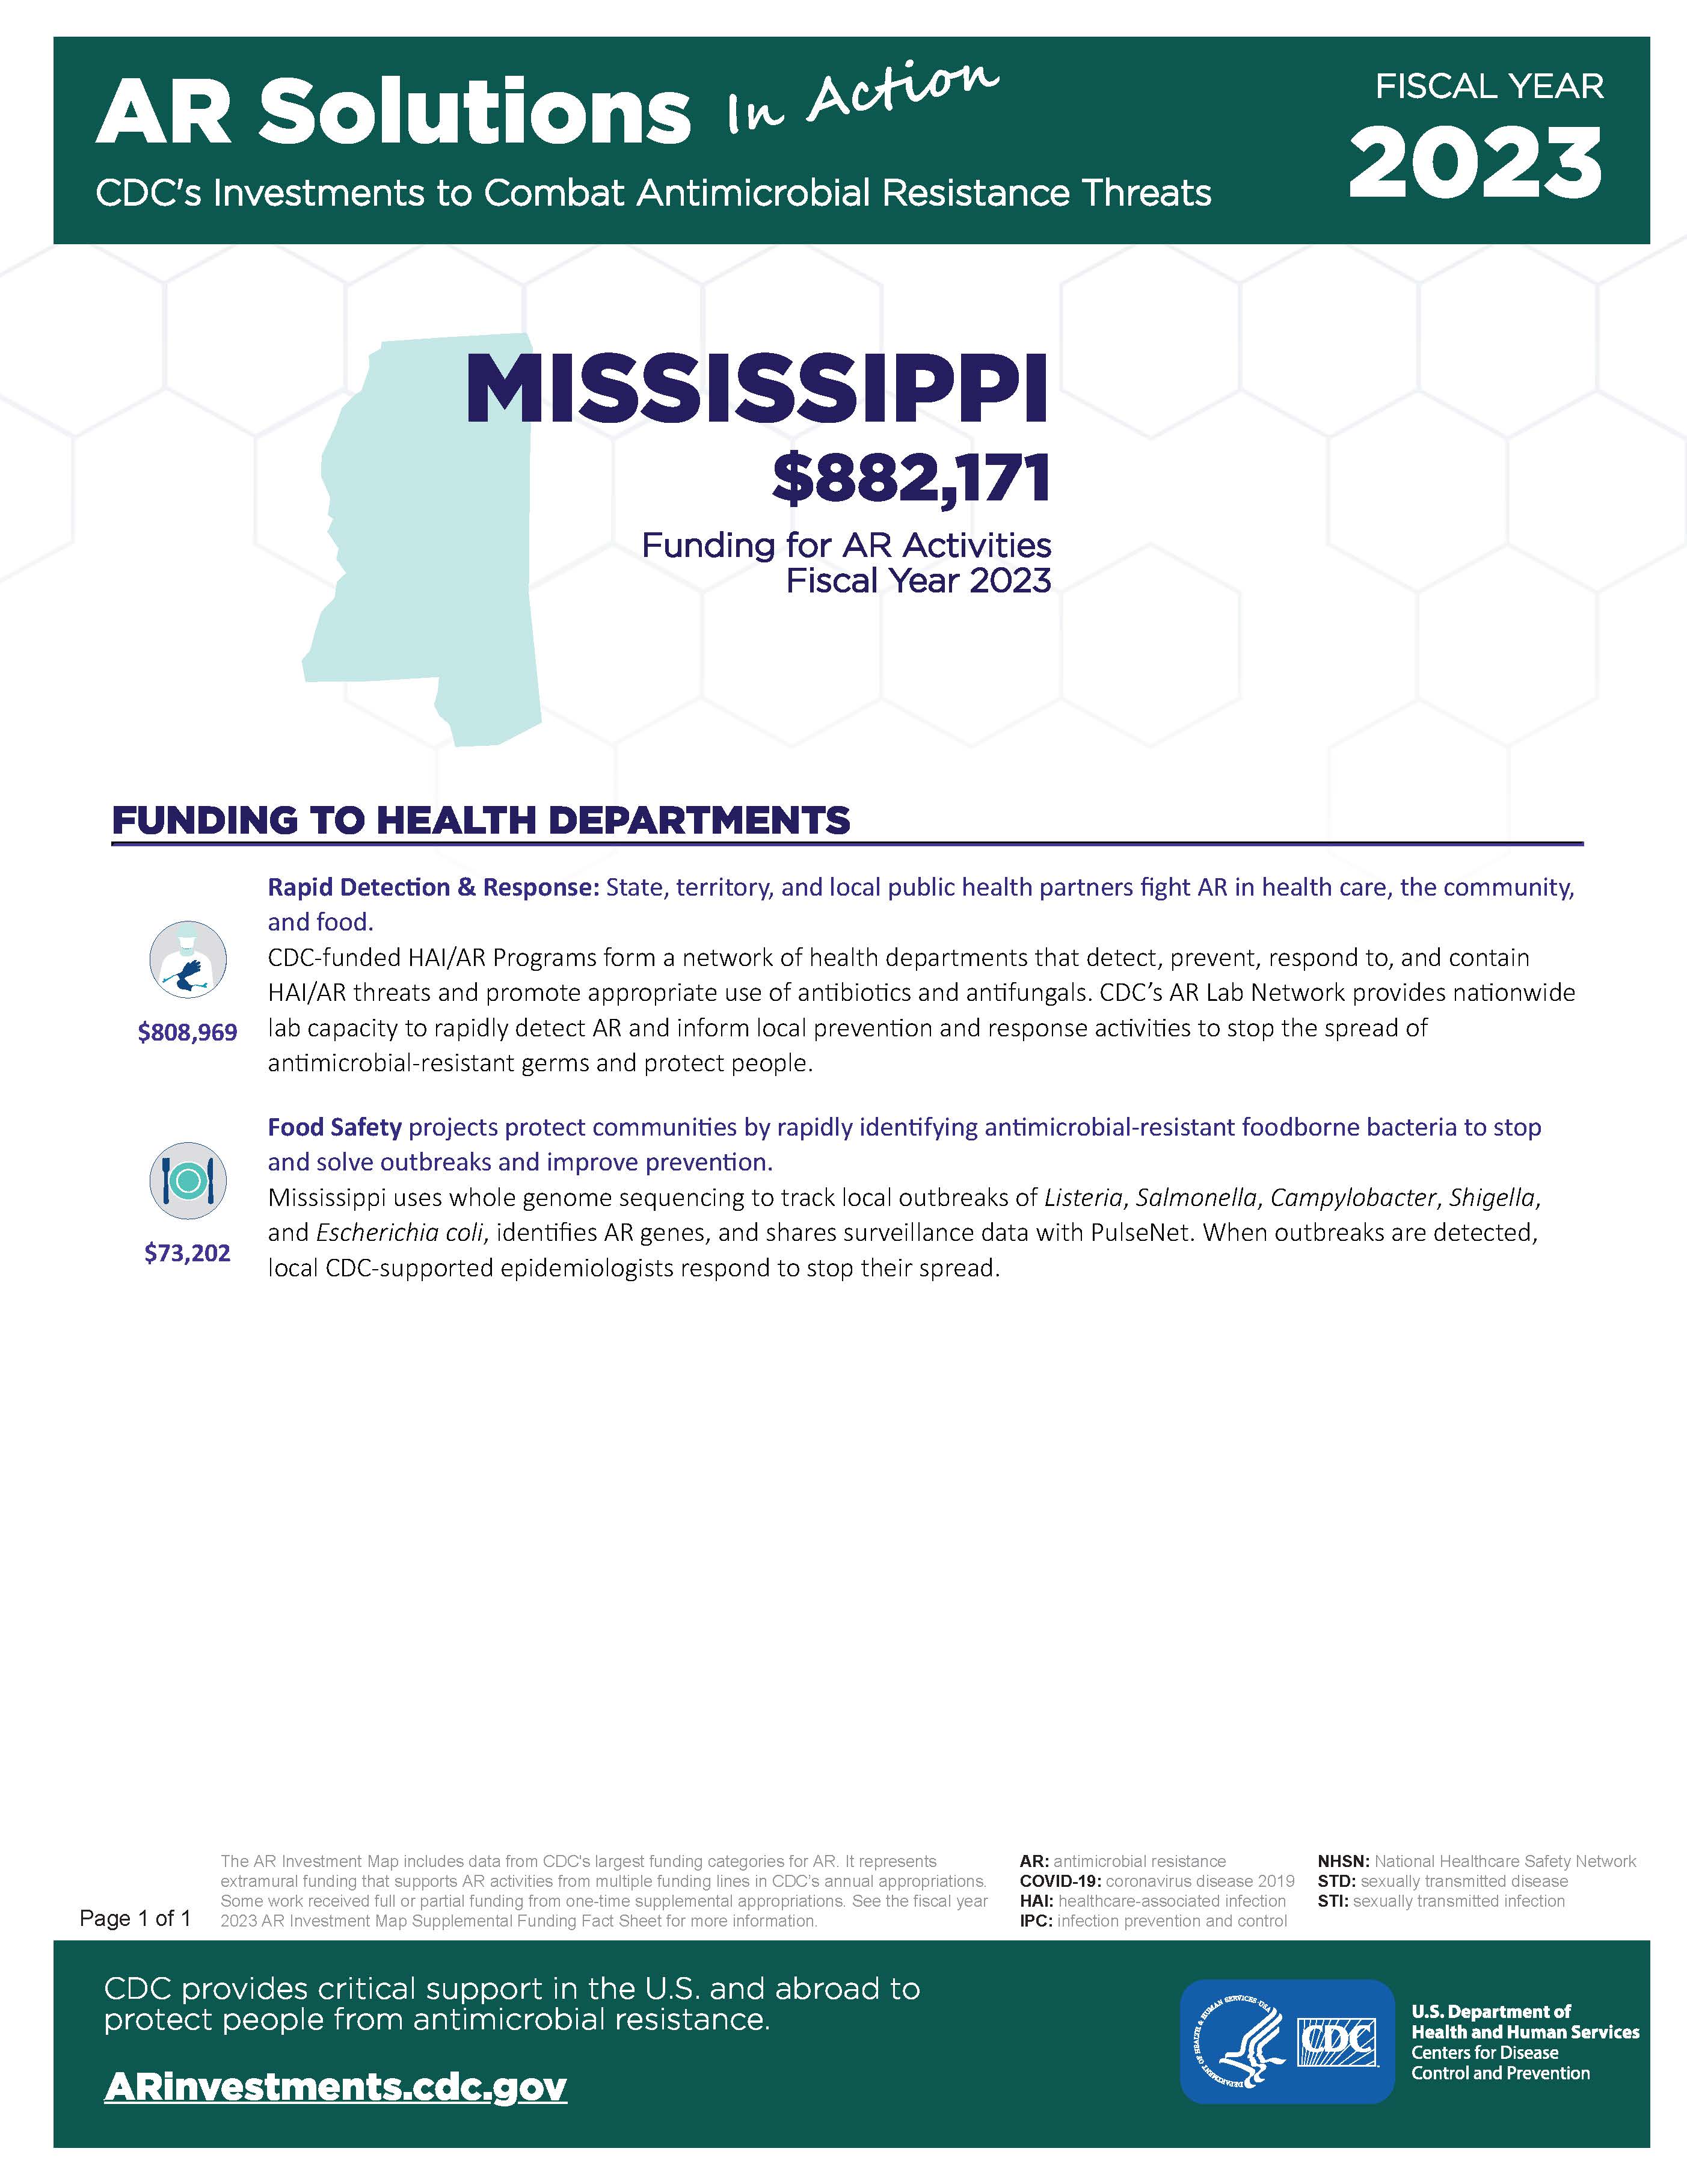 View Factsheet for Mississippi